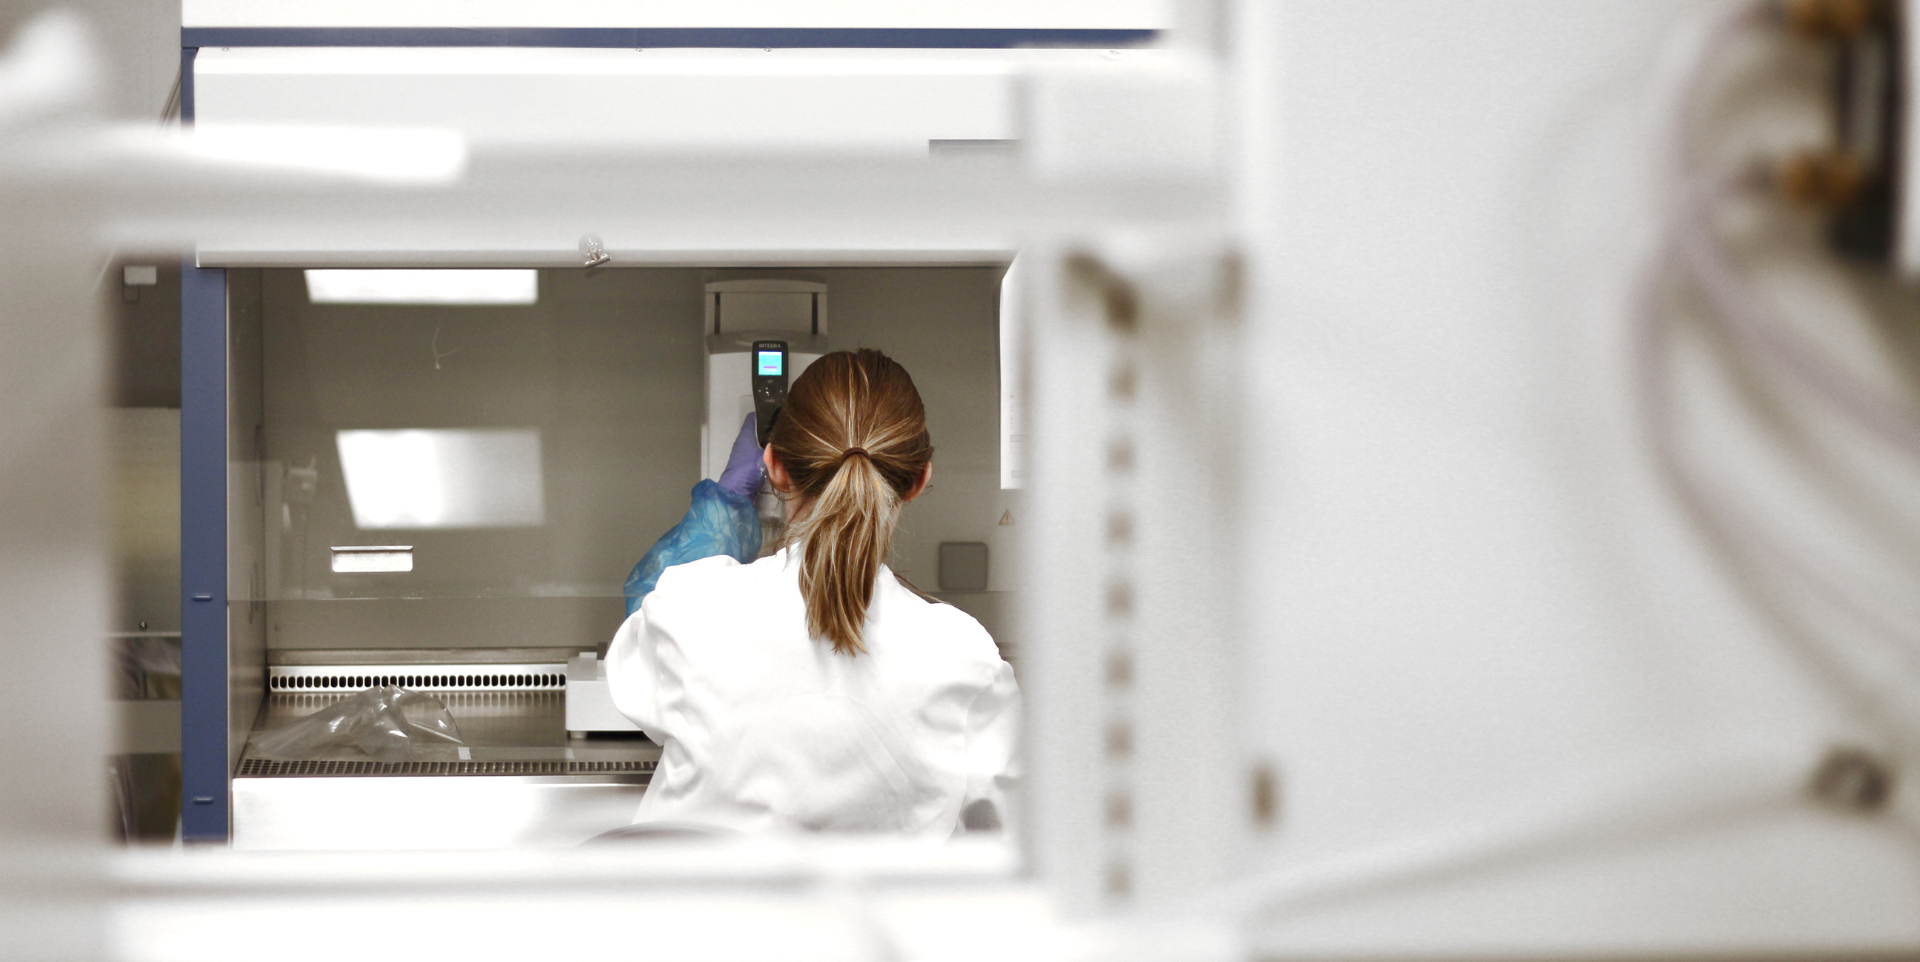 Lab Space for Start-Ups: image depicts a woman working in a laboratory. She is wearing a white lab coat and gloves and has her back to the camera.